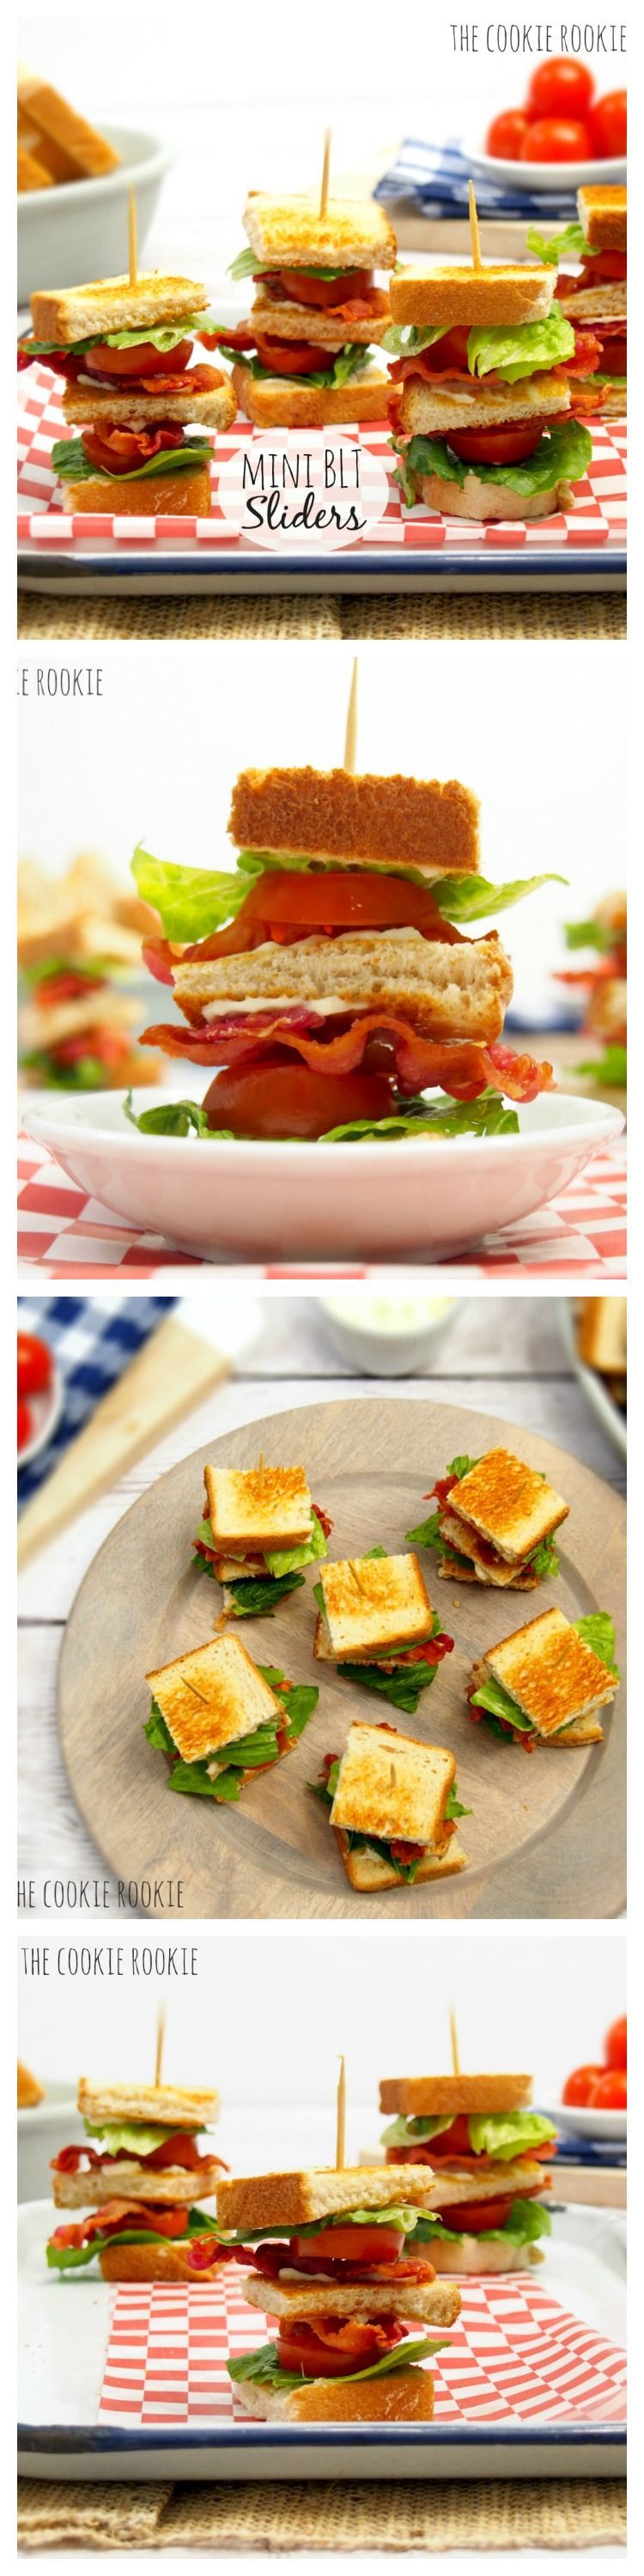 The Classics are the best! MINI BLT SLIDERS! So cute and easy.  LOVE! – The Cookie Rookie